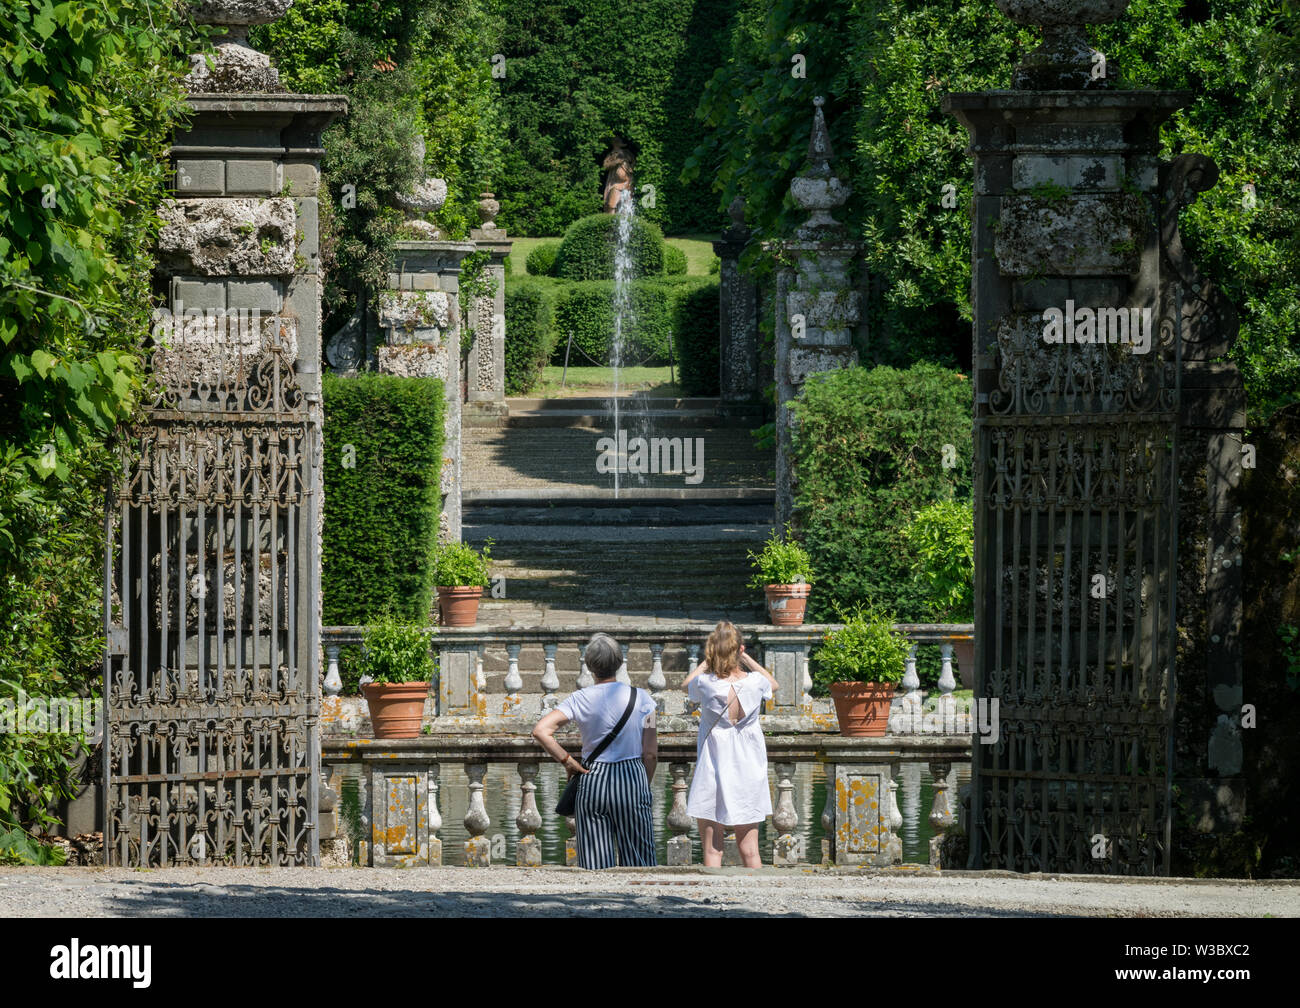 Marlia, Lucca, Italy - 2018, May 25: A glimps of the park of Villa Reale. An old iron gate opens to the formal garden. Tourists admire and take pictur Stock Photo